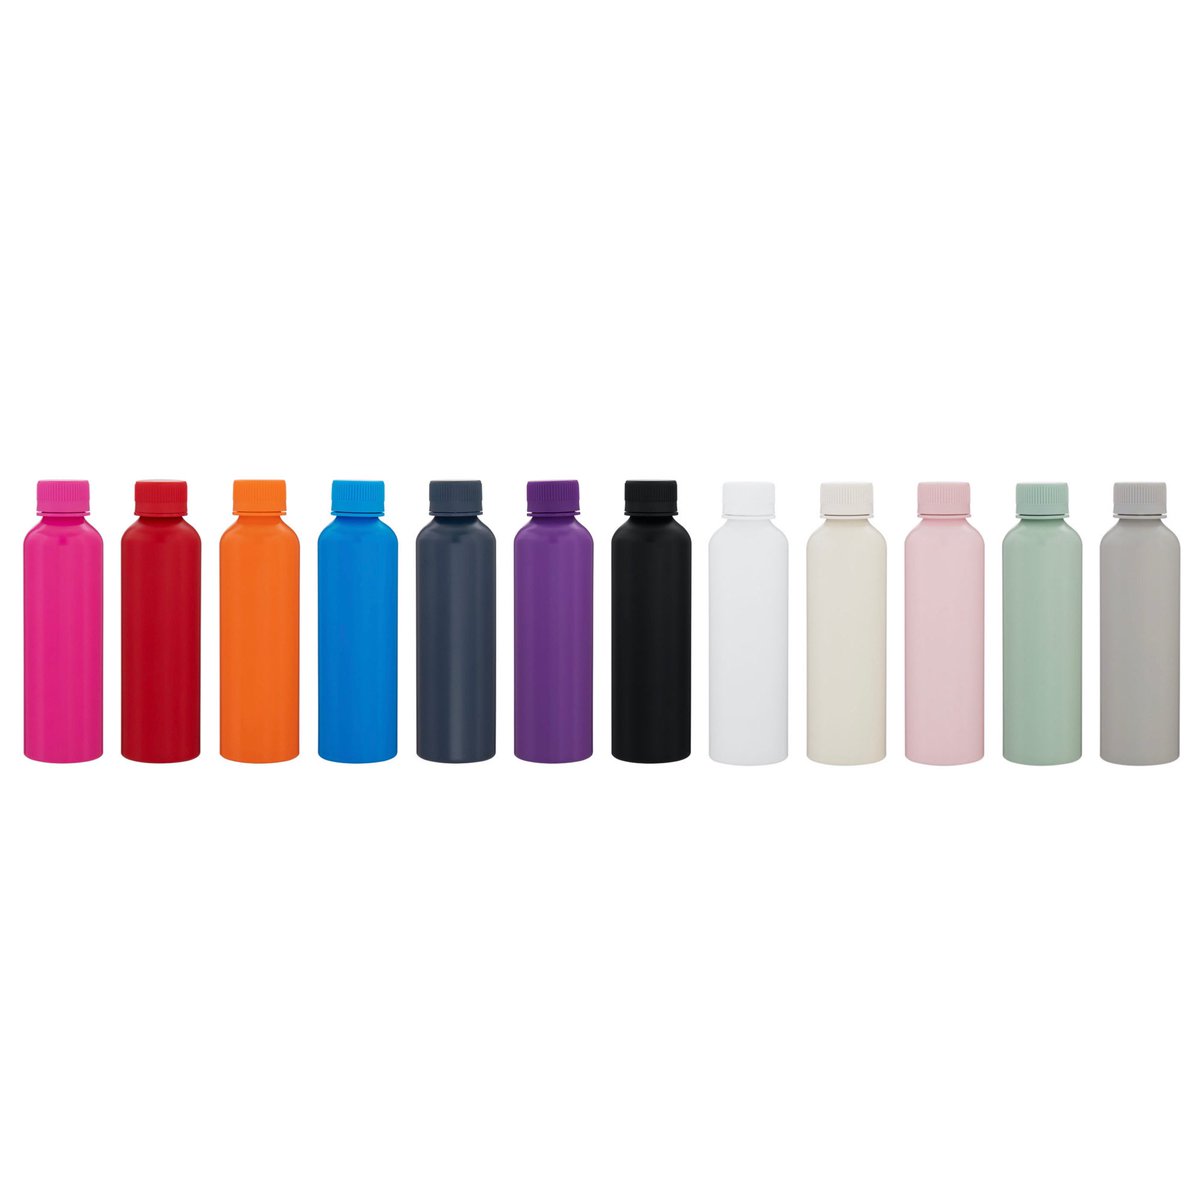 •NEW• London 20.9 oz single wall aluminum bottle with matching threaded lid 💧

• Gift box included
• Available in 12 different colors 
• Starting at only $5.79

#promotionalproducts #yourlogohere #waterbottle